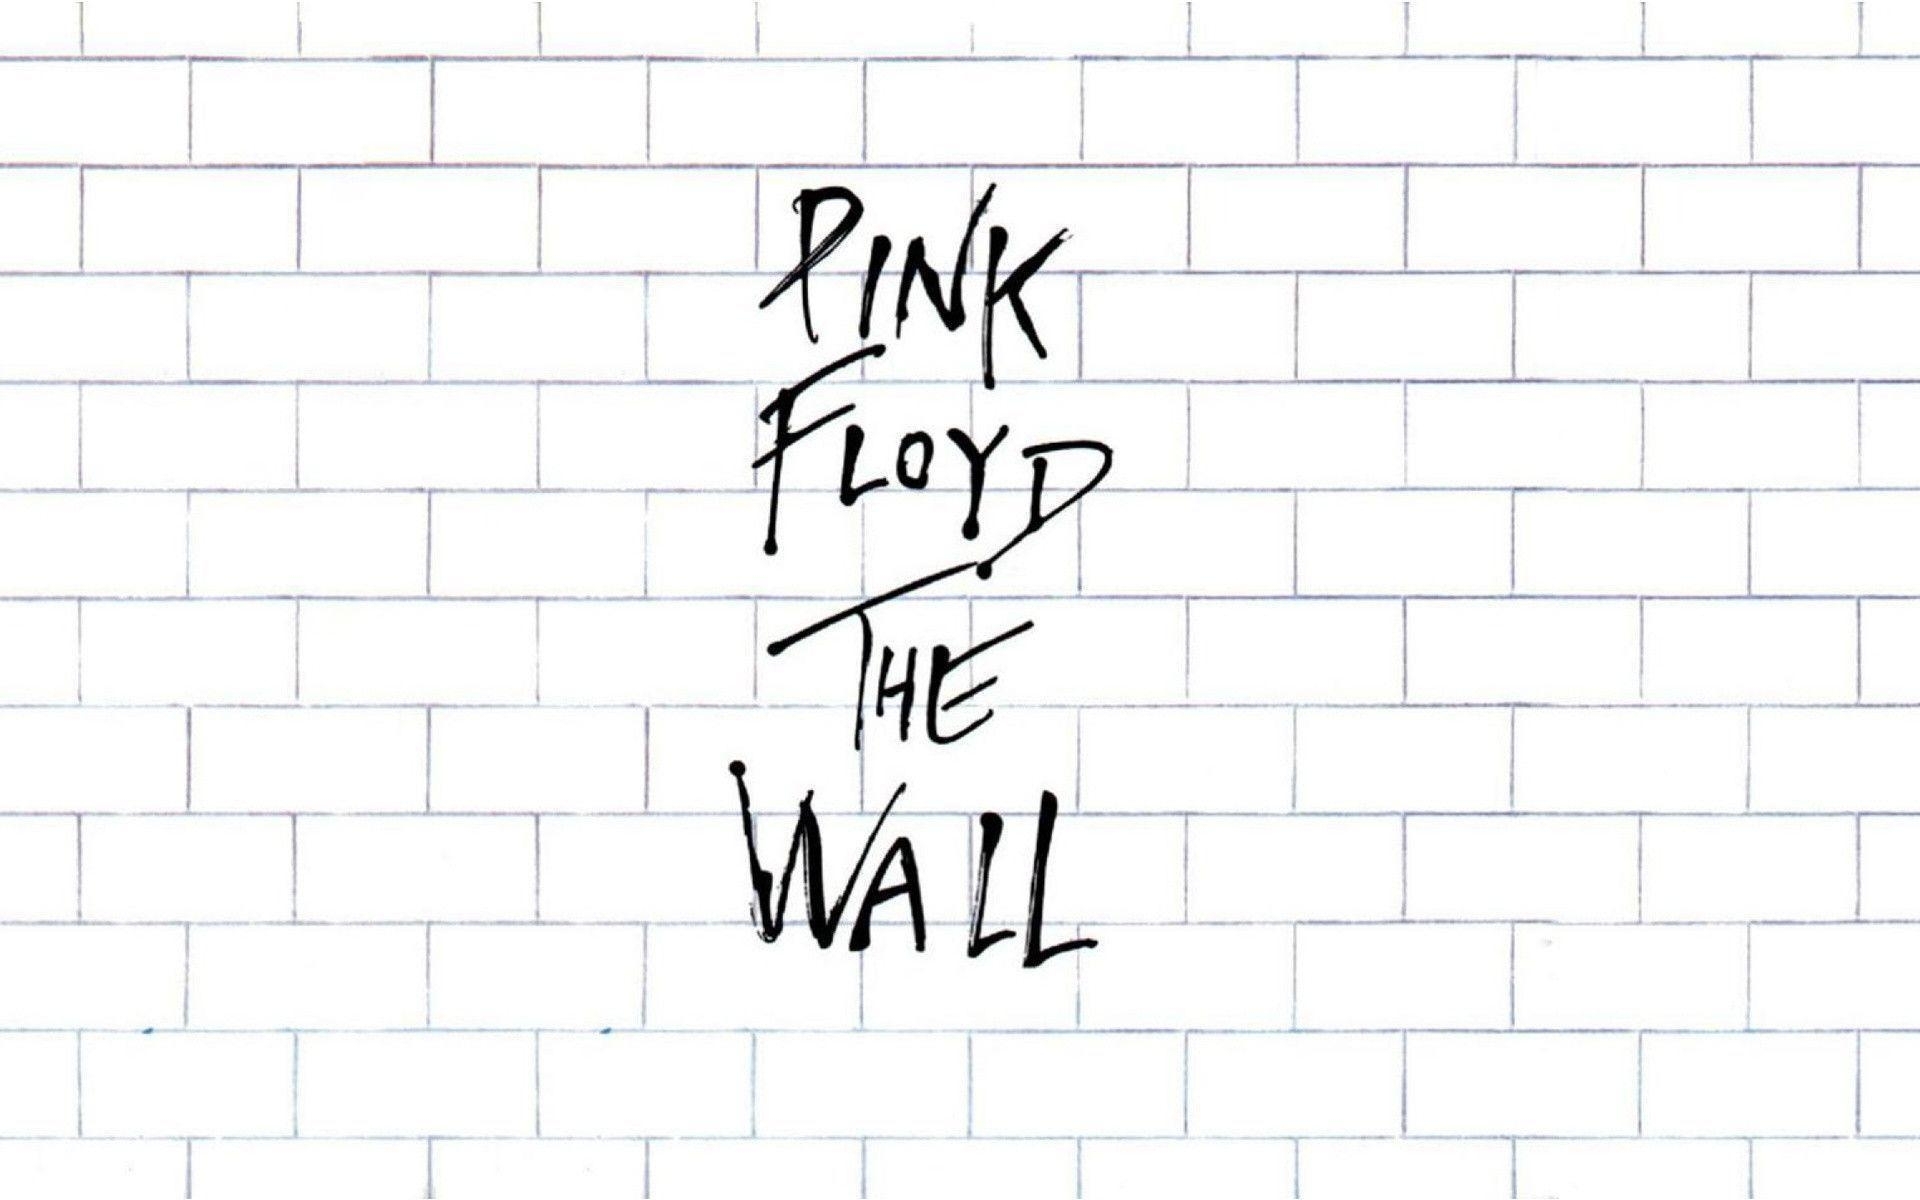 10 Latest The Wall Pink Floyd Wallpaper FULL HD 1080p For PC Desktop